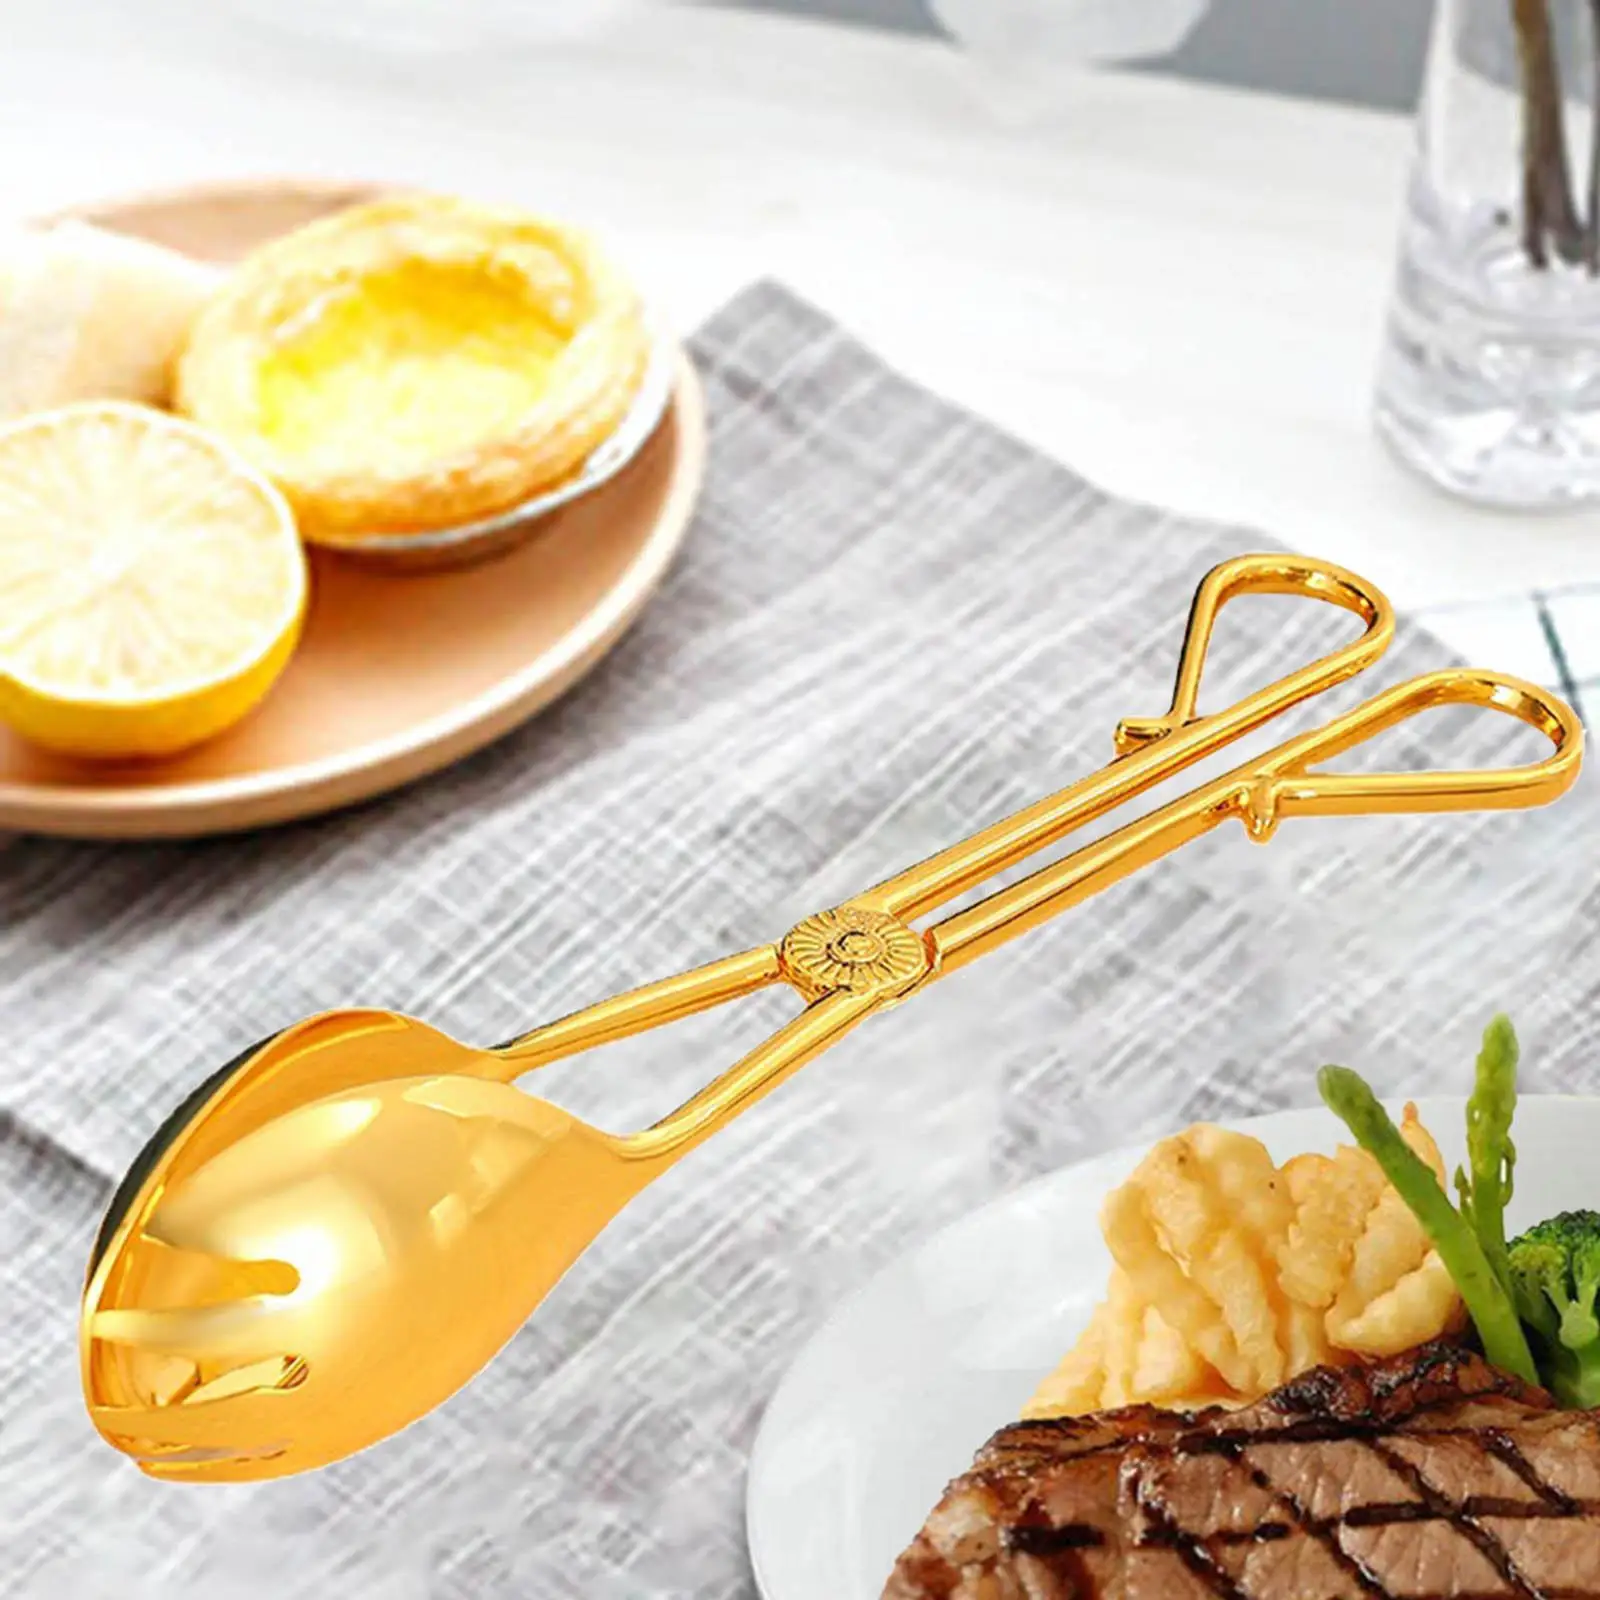 Serving Tongs Heat Resistant Durable Salad Clips Zinc Allloy Cooking Tongs for Catering Parties Kitchen Salad Grilled Foods